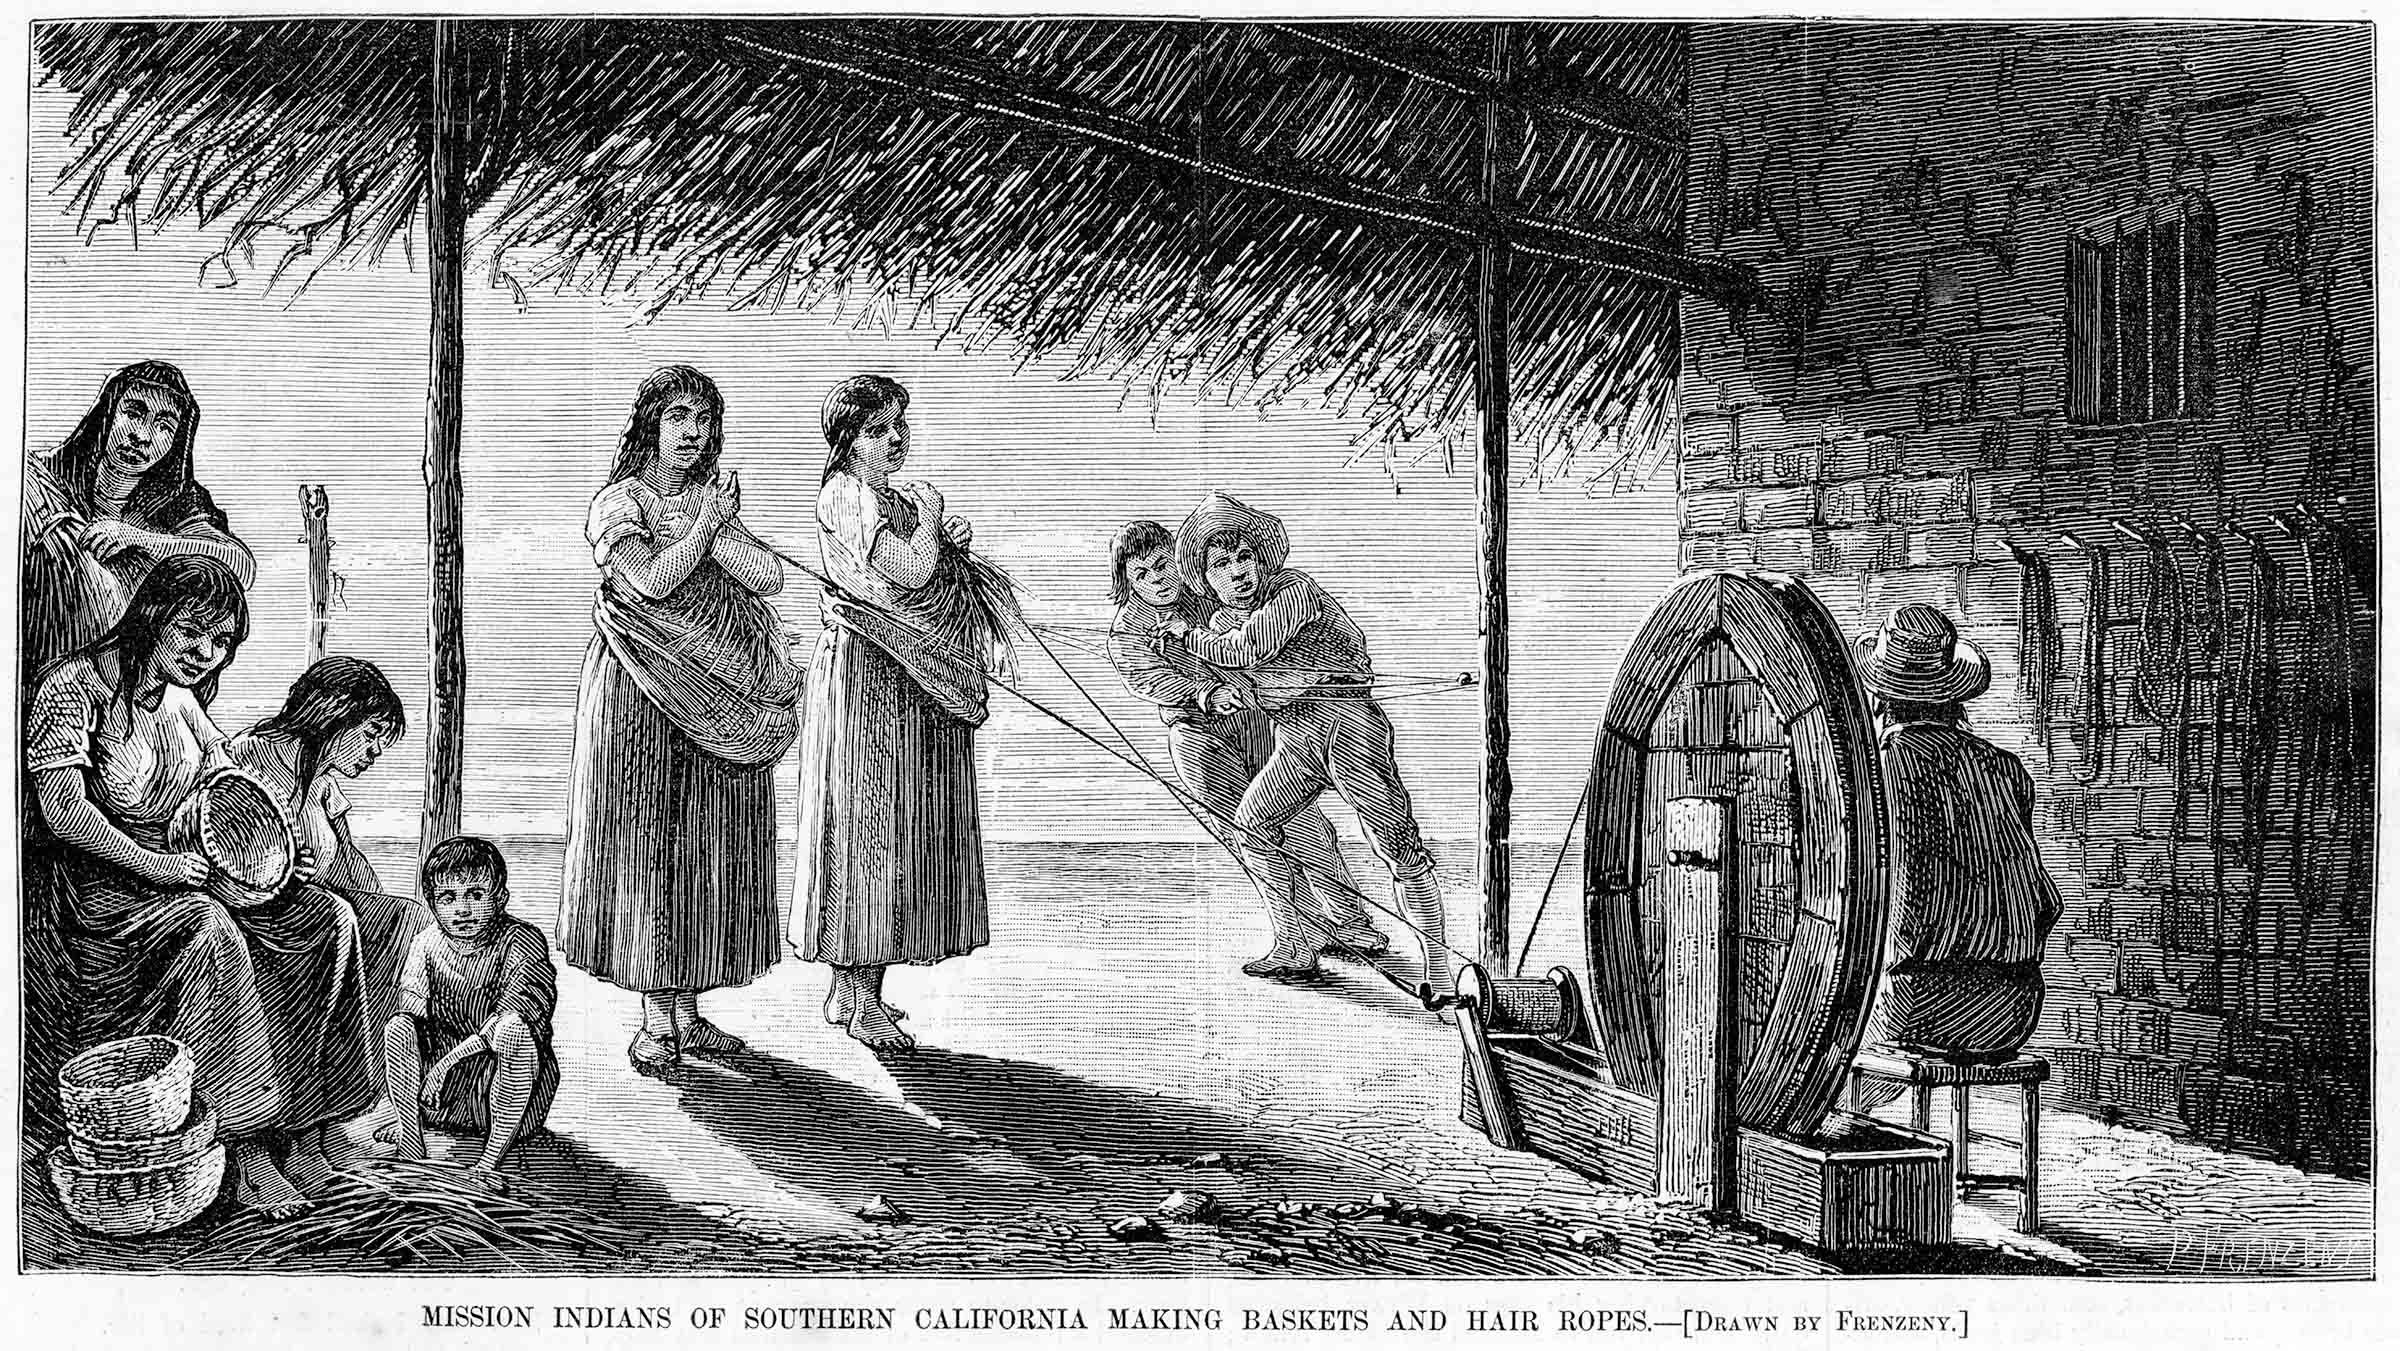 Mission Indians of Southern California Making Baskets and Hair Ropes